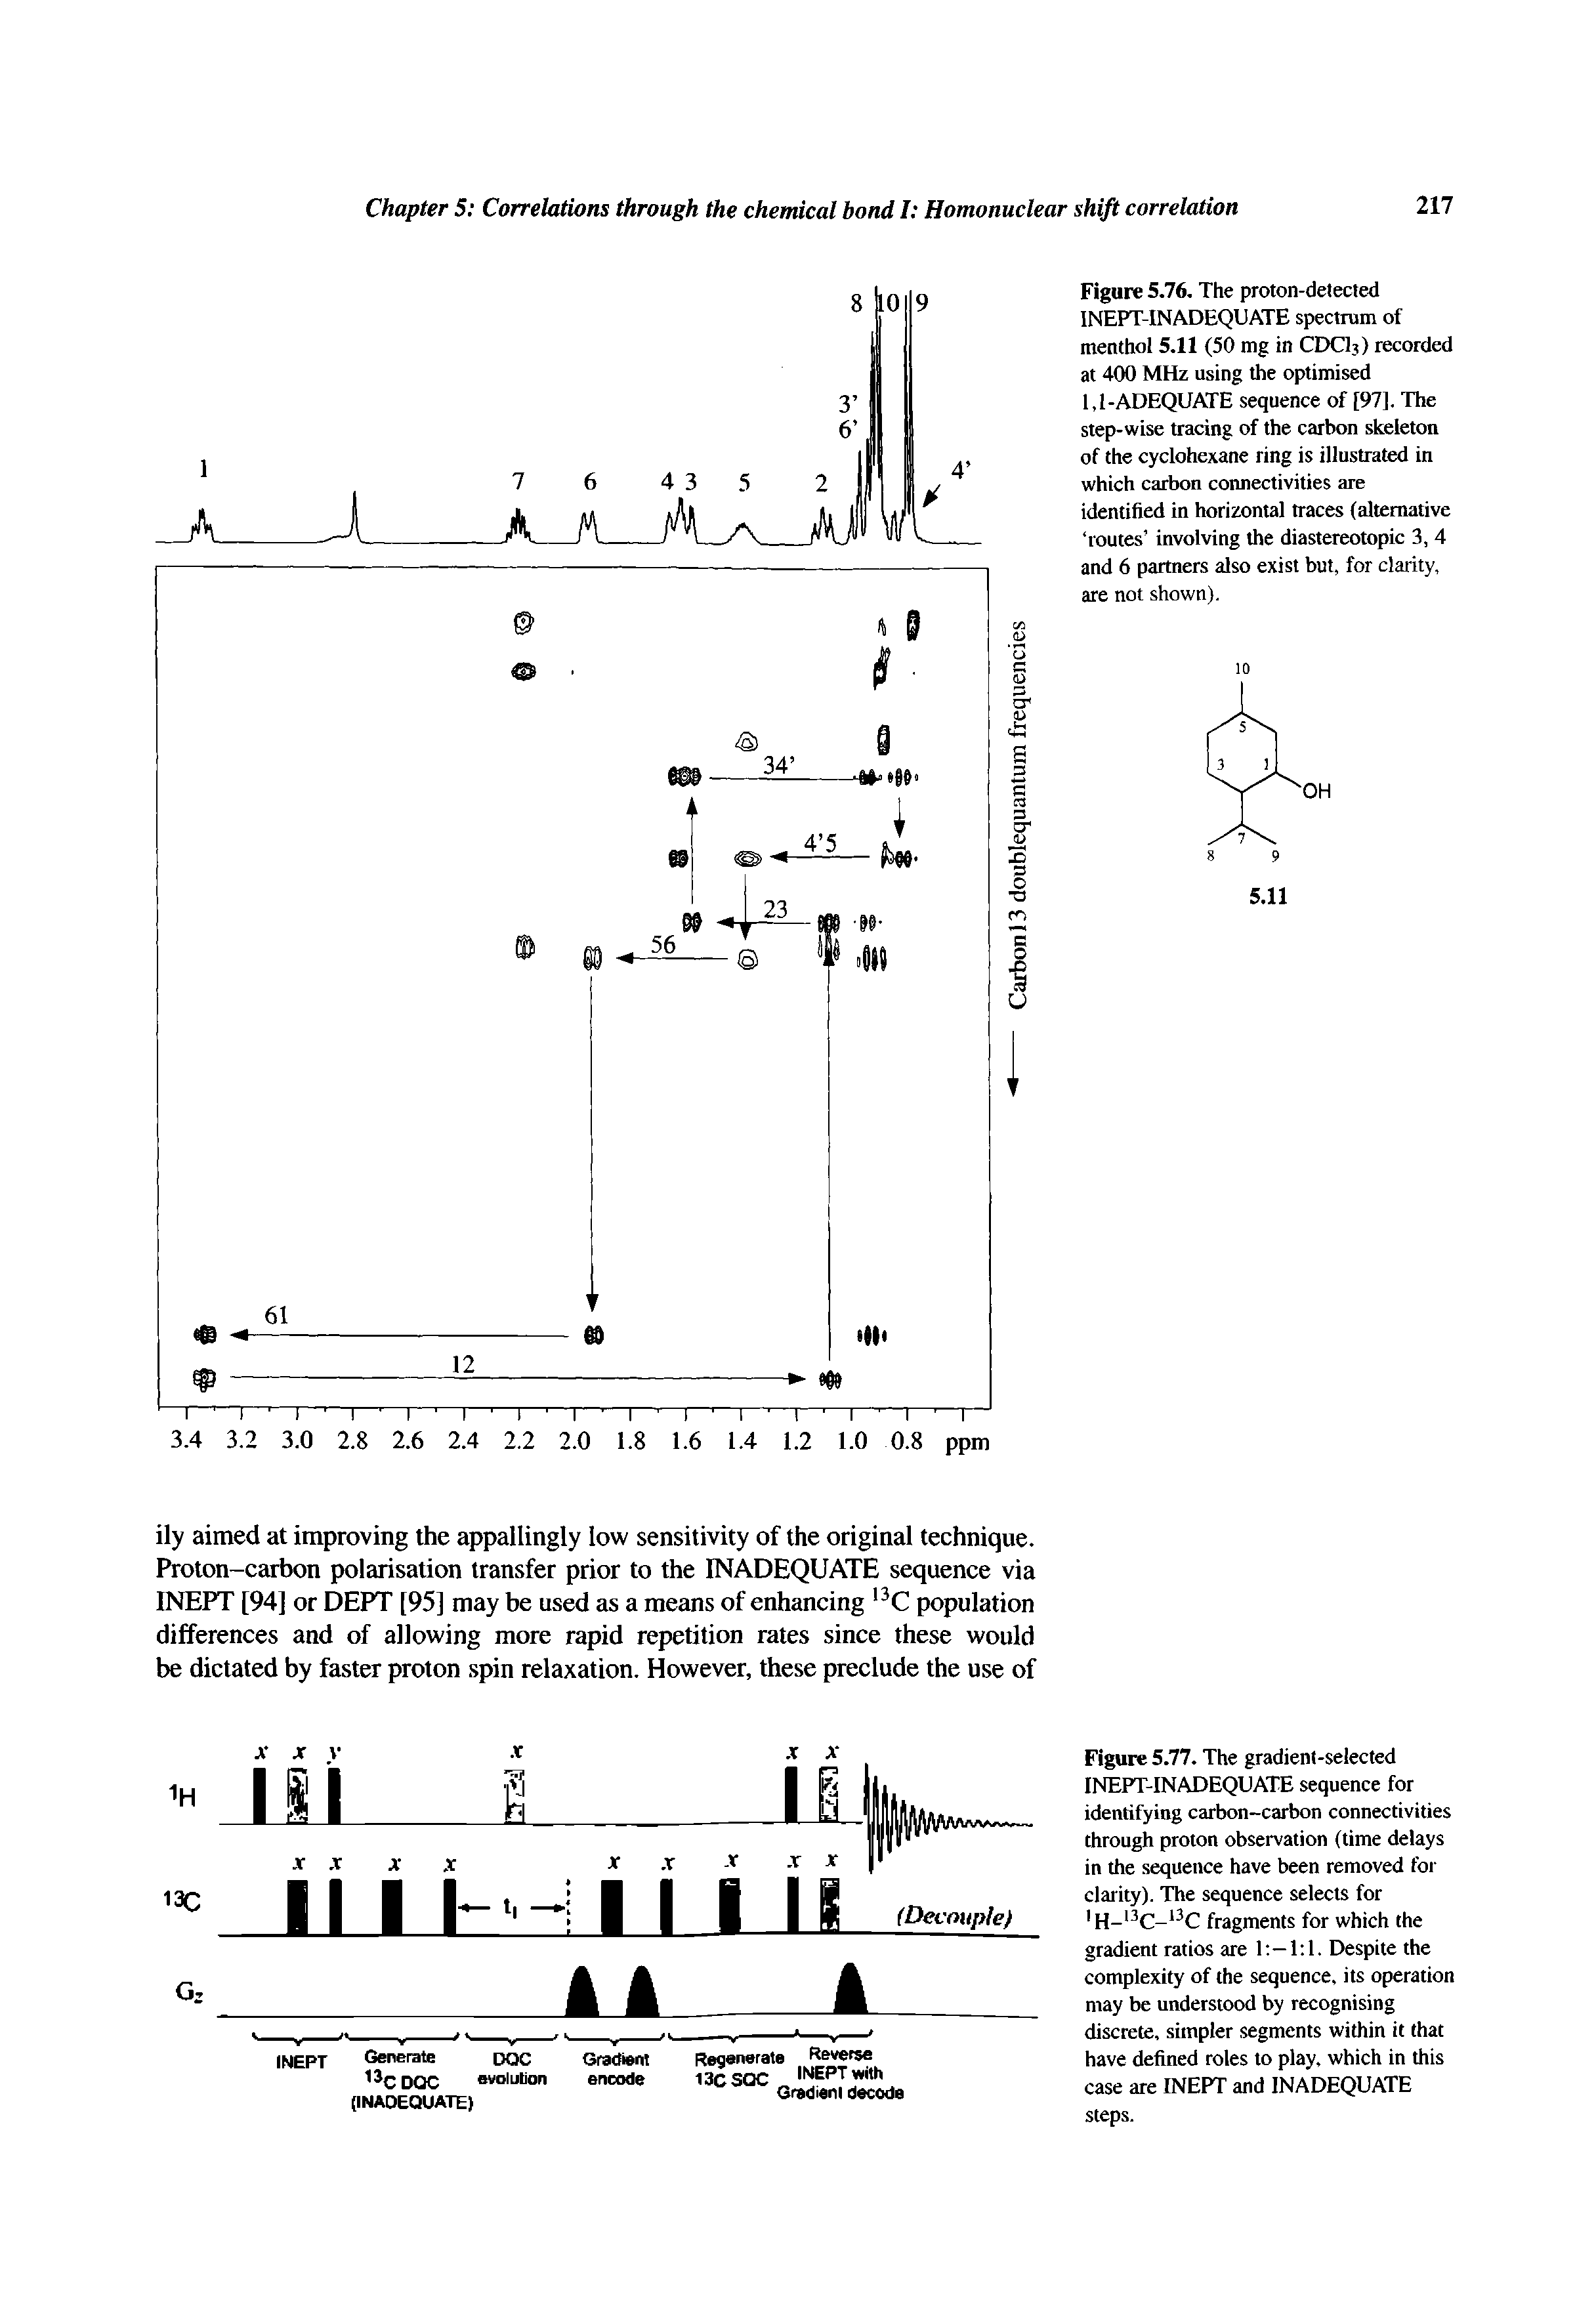 Figure 5.76, The proton-delected INEPT-INADEQUATE spectrum of menthol 5.11 (50 mg in CDCI3) recorded at 400 MHz using the optimised 1,1-ADEQUATE sequence of [97], The step-wise tracing of the carbon skeleton of the cyclohexane ring is illustrated in which carbon connectivities are identihed in horizontal traces (alternative routes involving the diastereotopic 3, 4 and 6 partners also exist but, for clarity, are not shown).